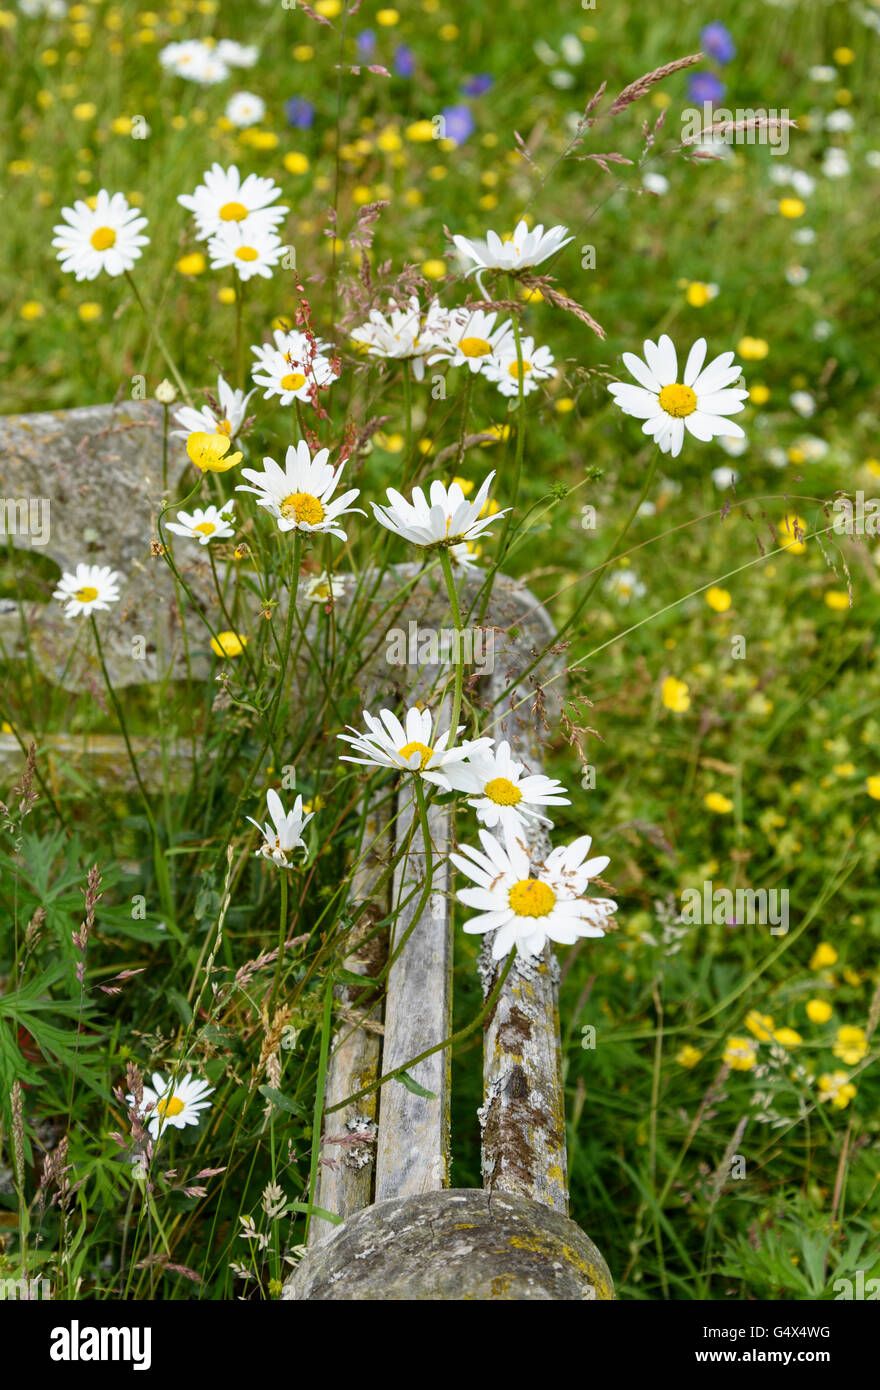 Spring daisies with old garden bench. Stock Photo